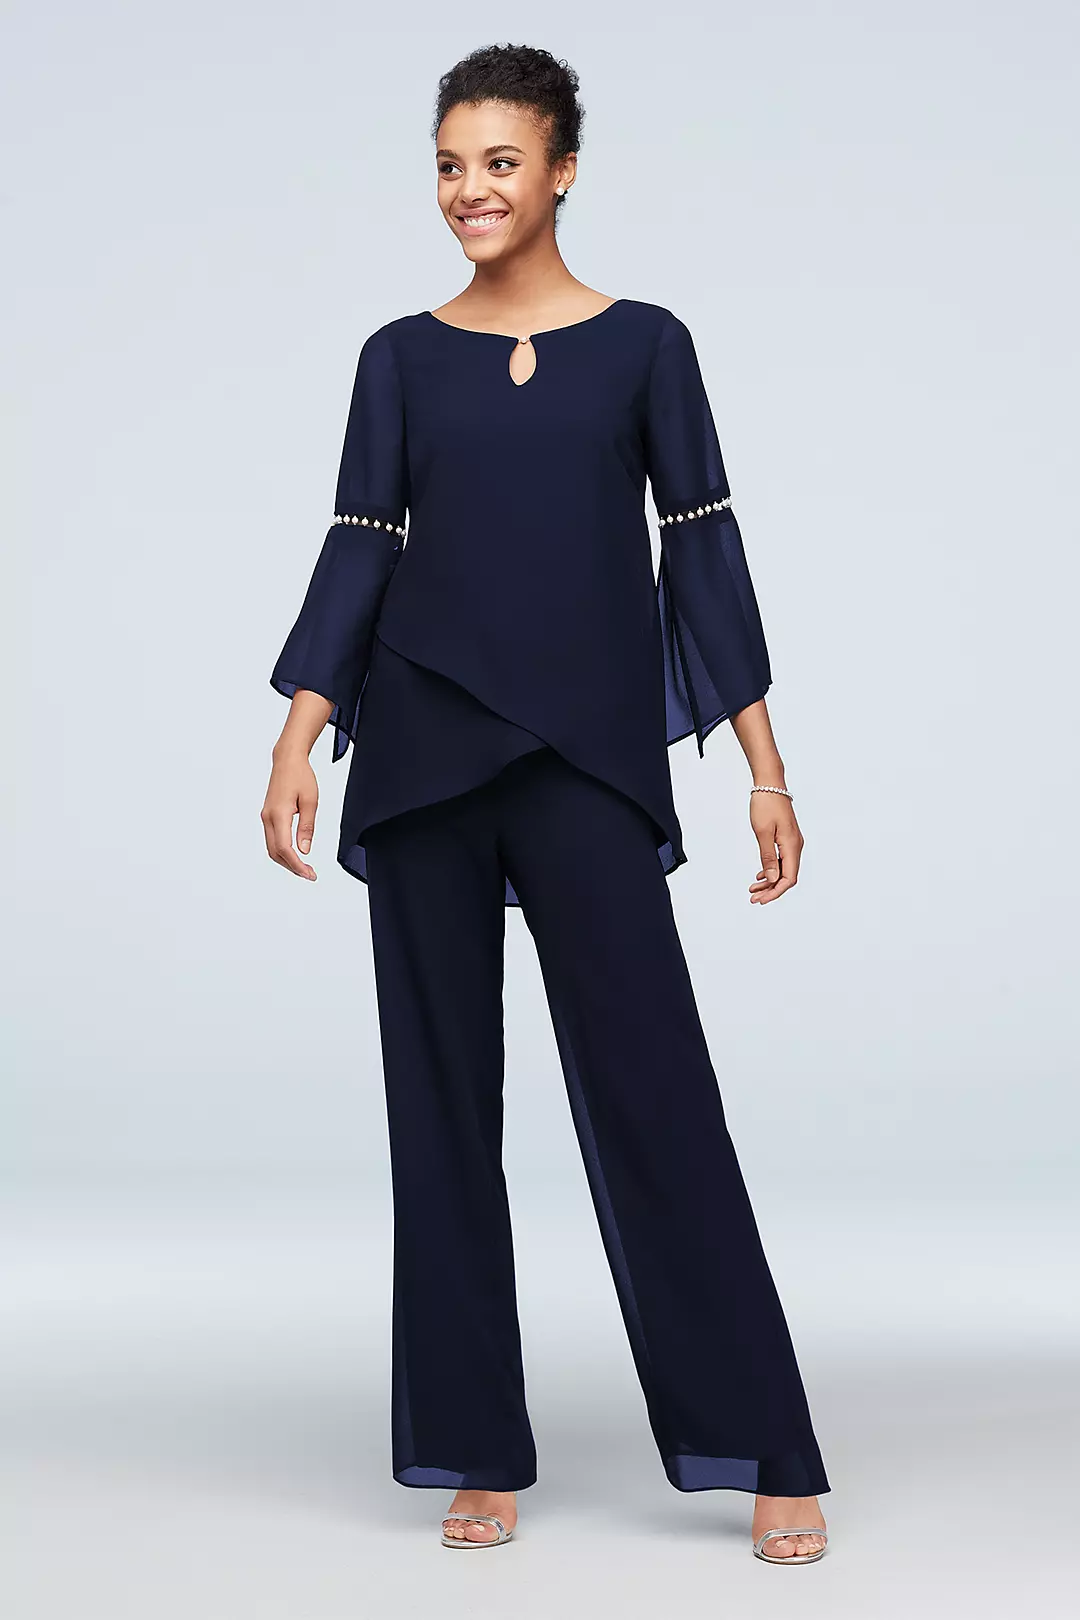 Asymmetric Hem Pants and Top Set with Pearl Detail Image